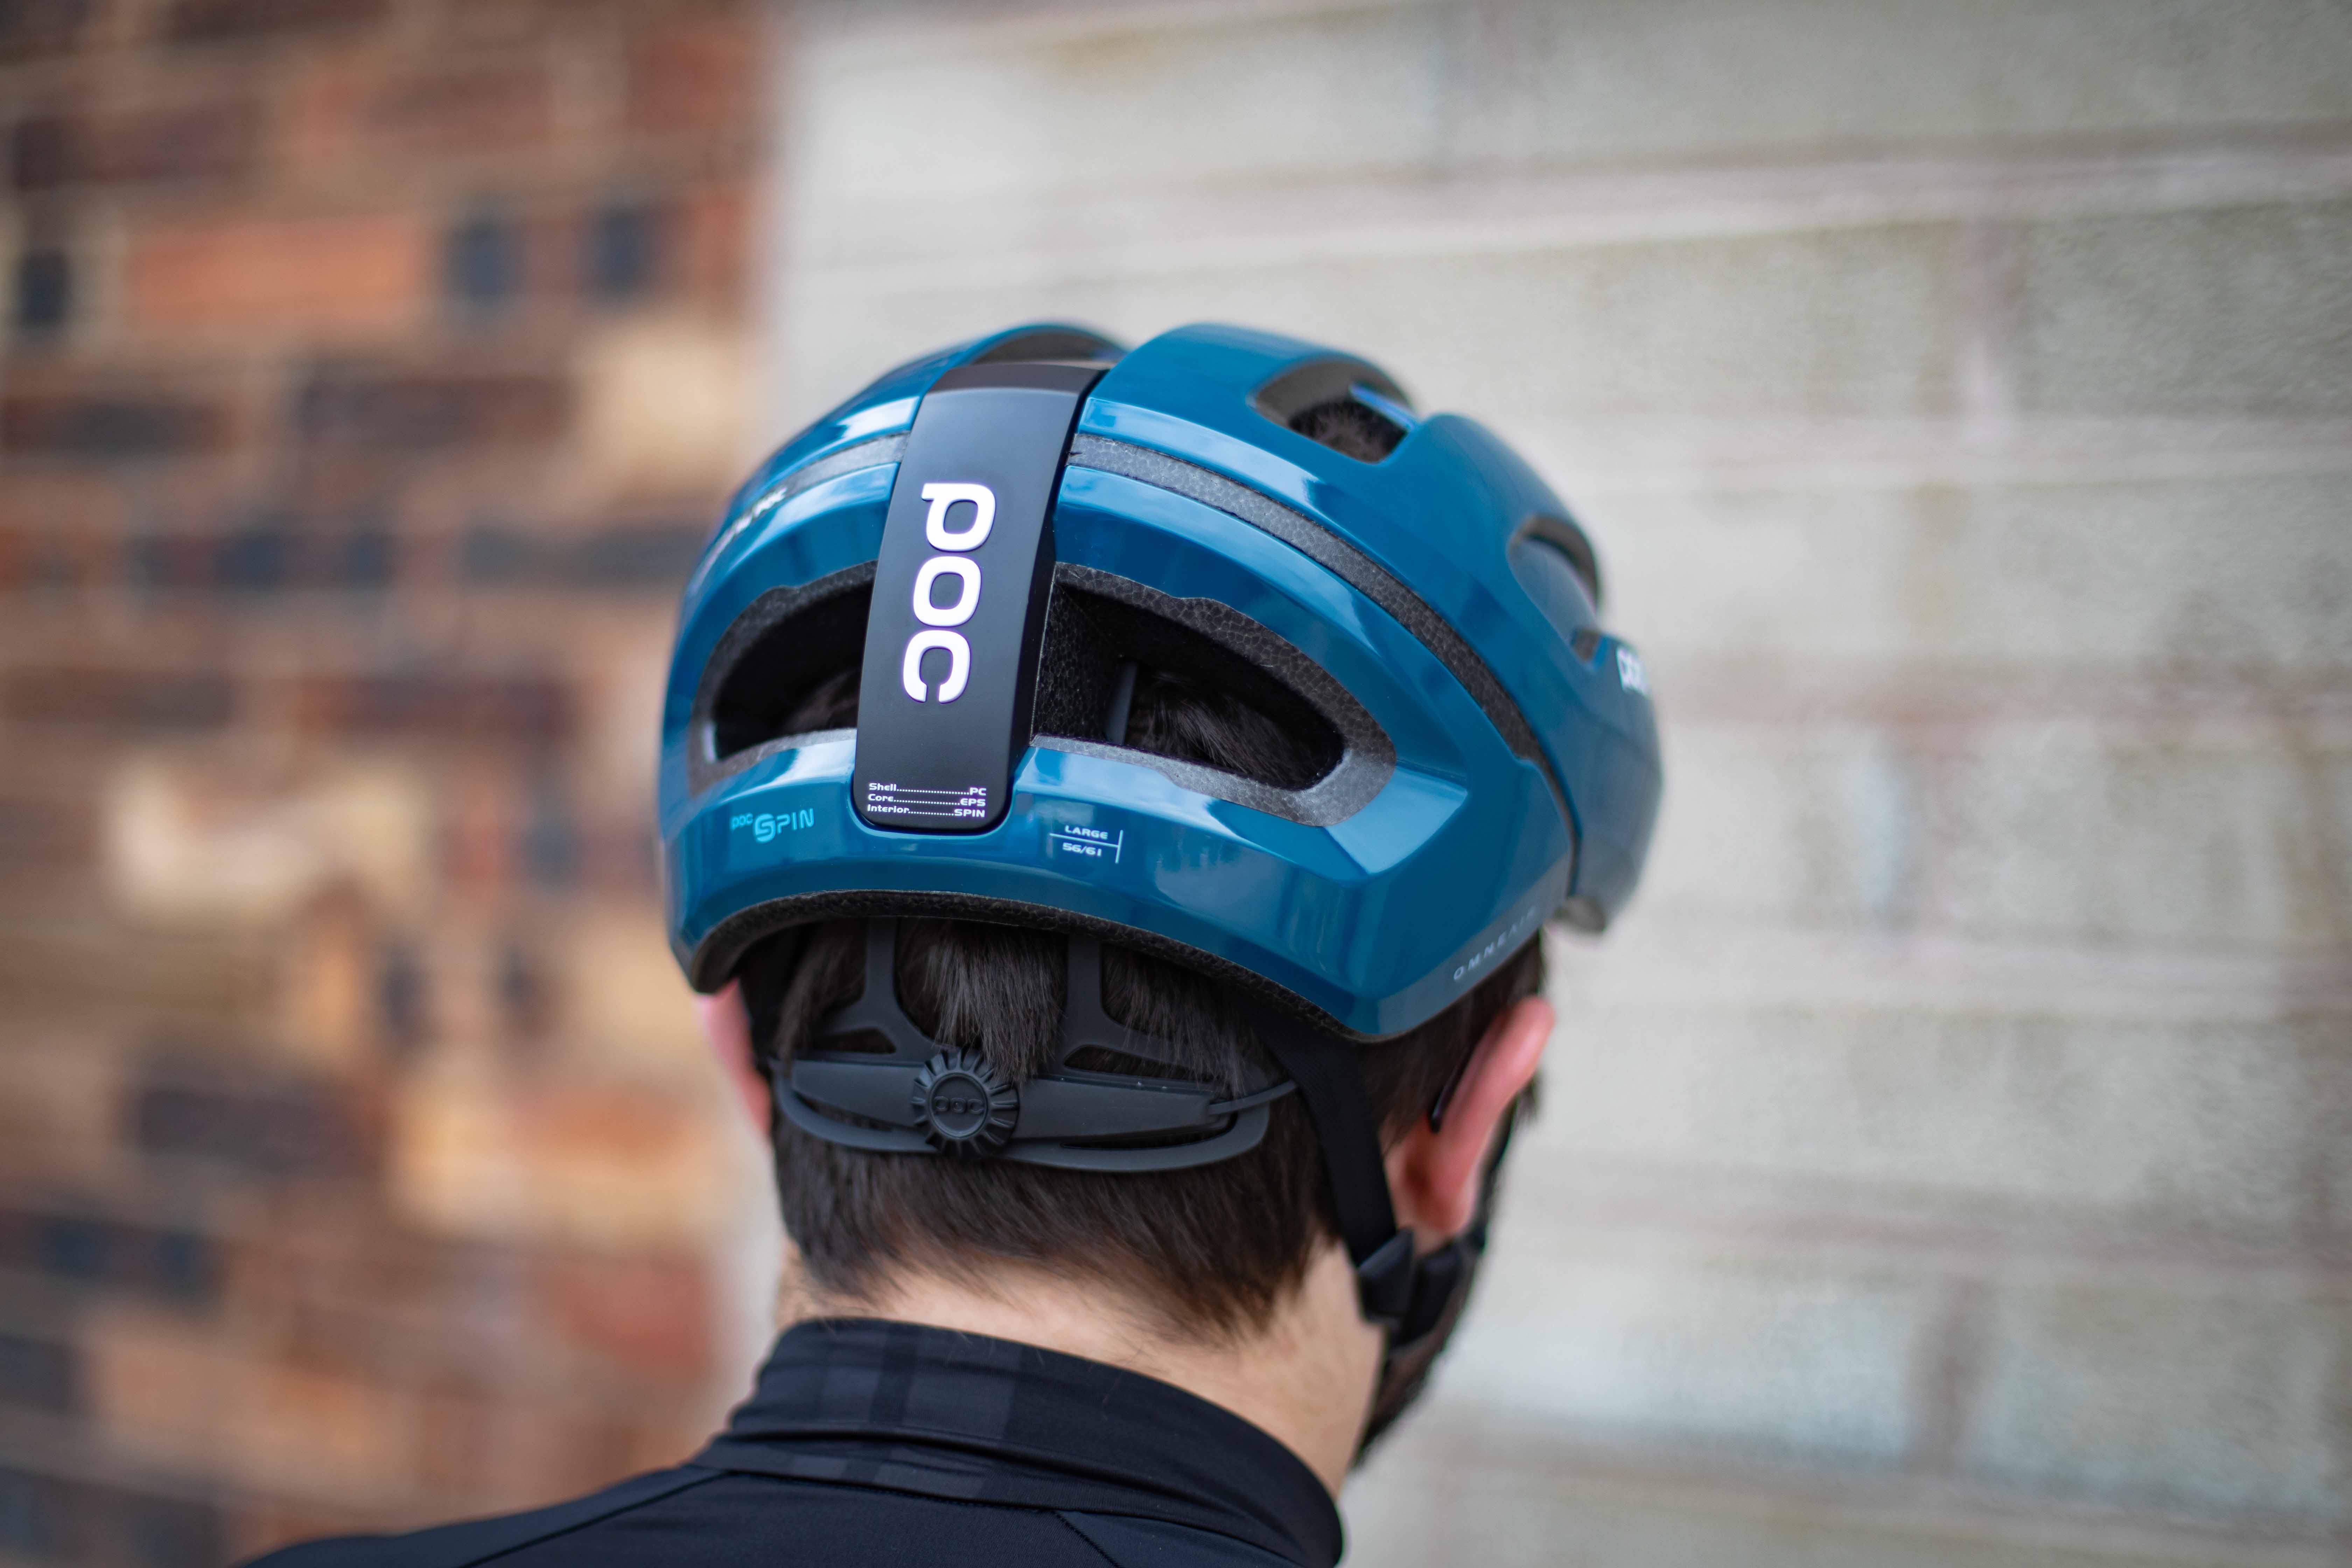 Global Featured Omne Air Spin Bike Helmet for Commuters and Road